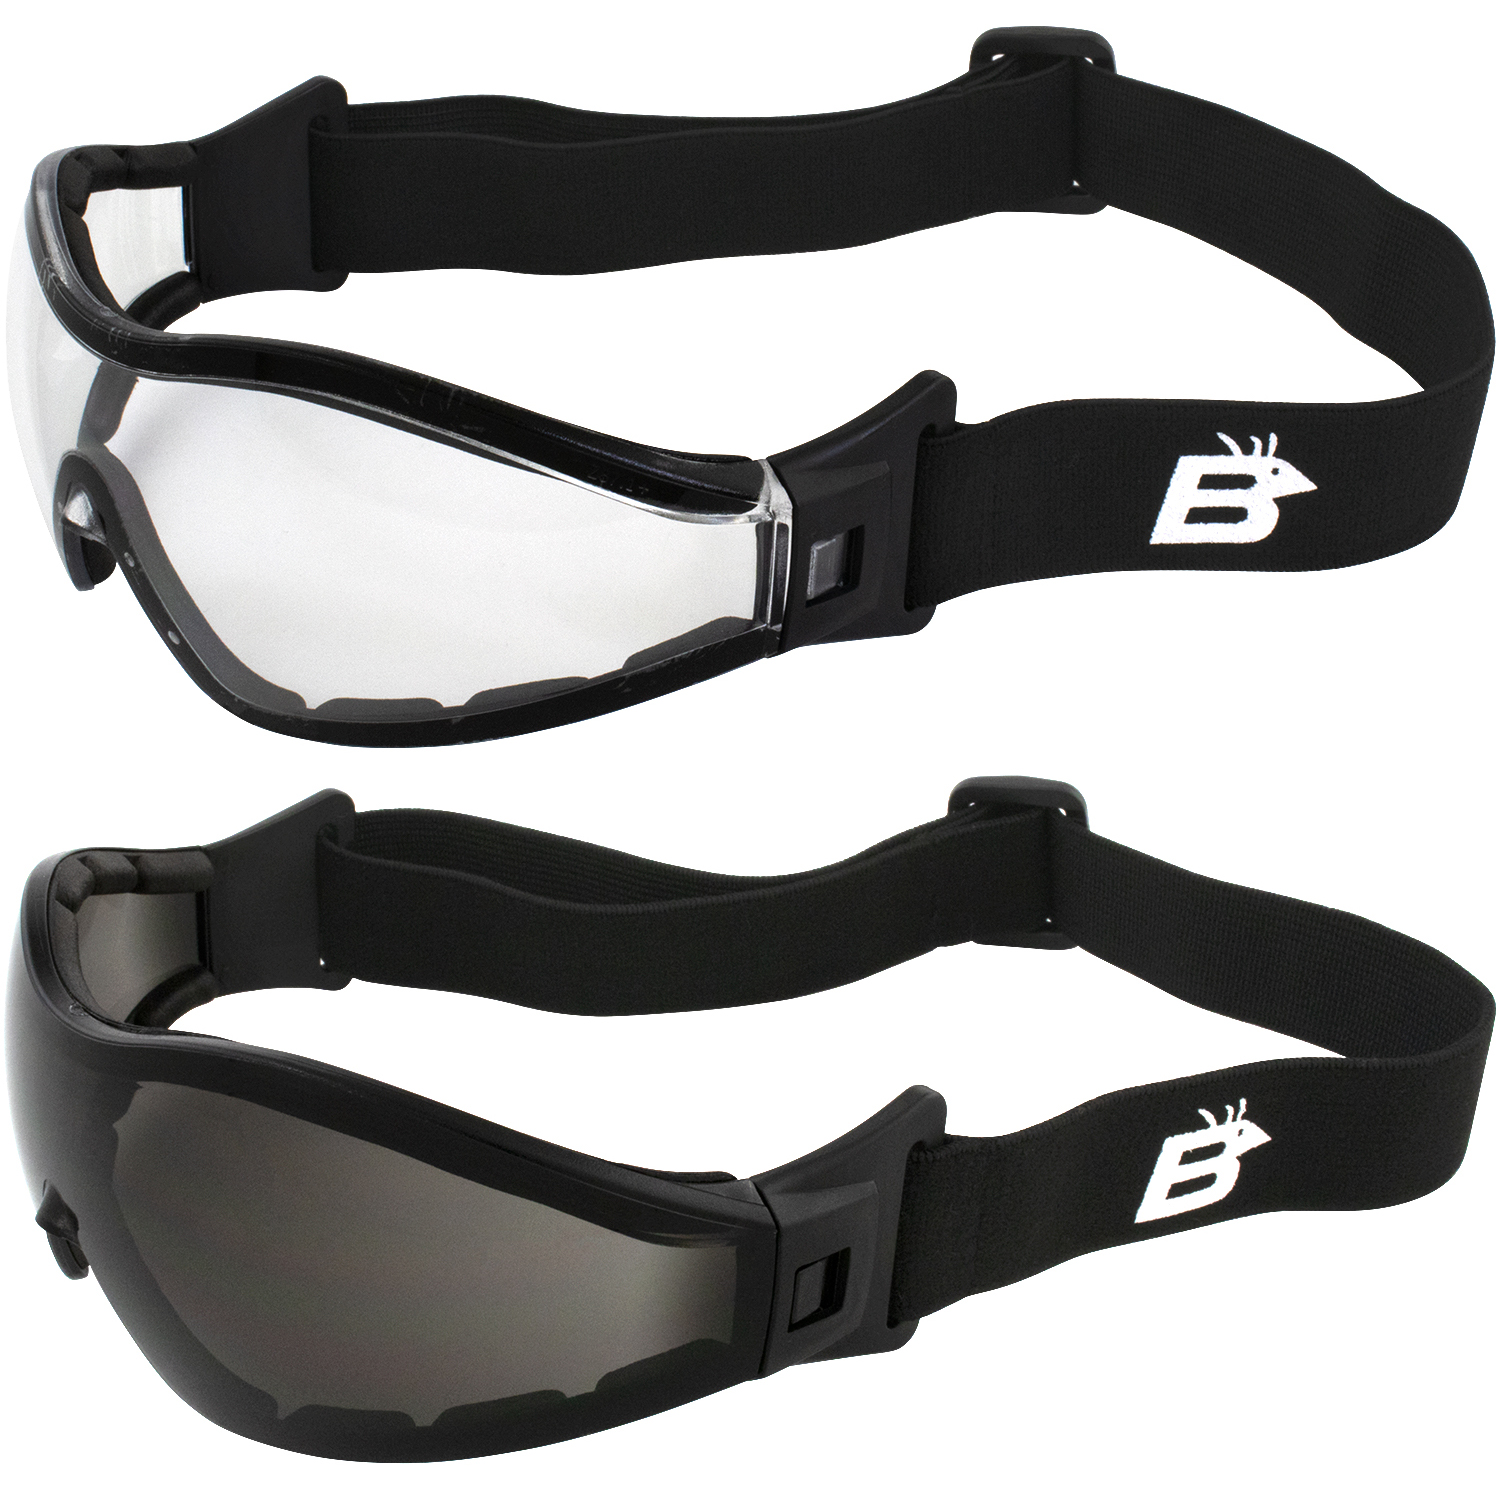 2 Pairs of Birdz Eyewear Boogie Foam Padded Motorcycle Ski Skydiving Z87.1 Safety Goggles Black Frames with Clear & Smoke Anti-Fog Lenses - image 1 of 7